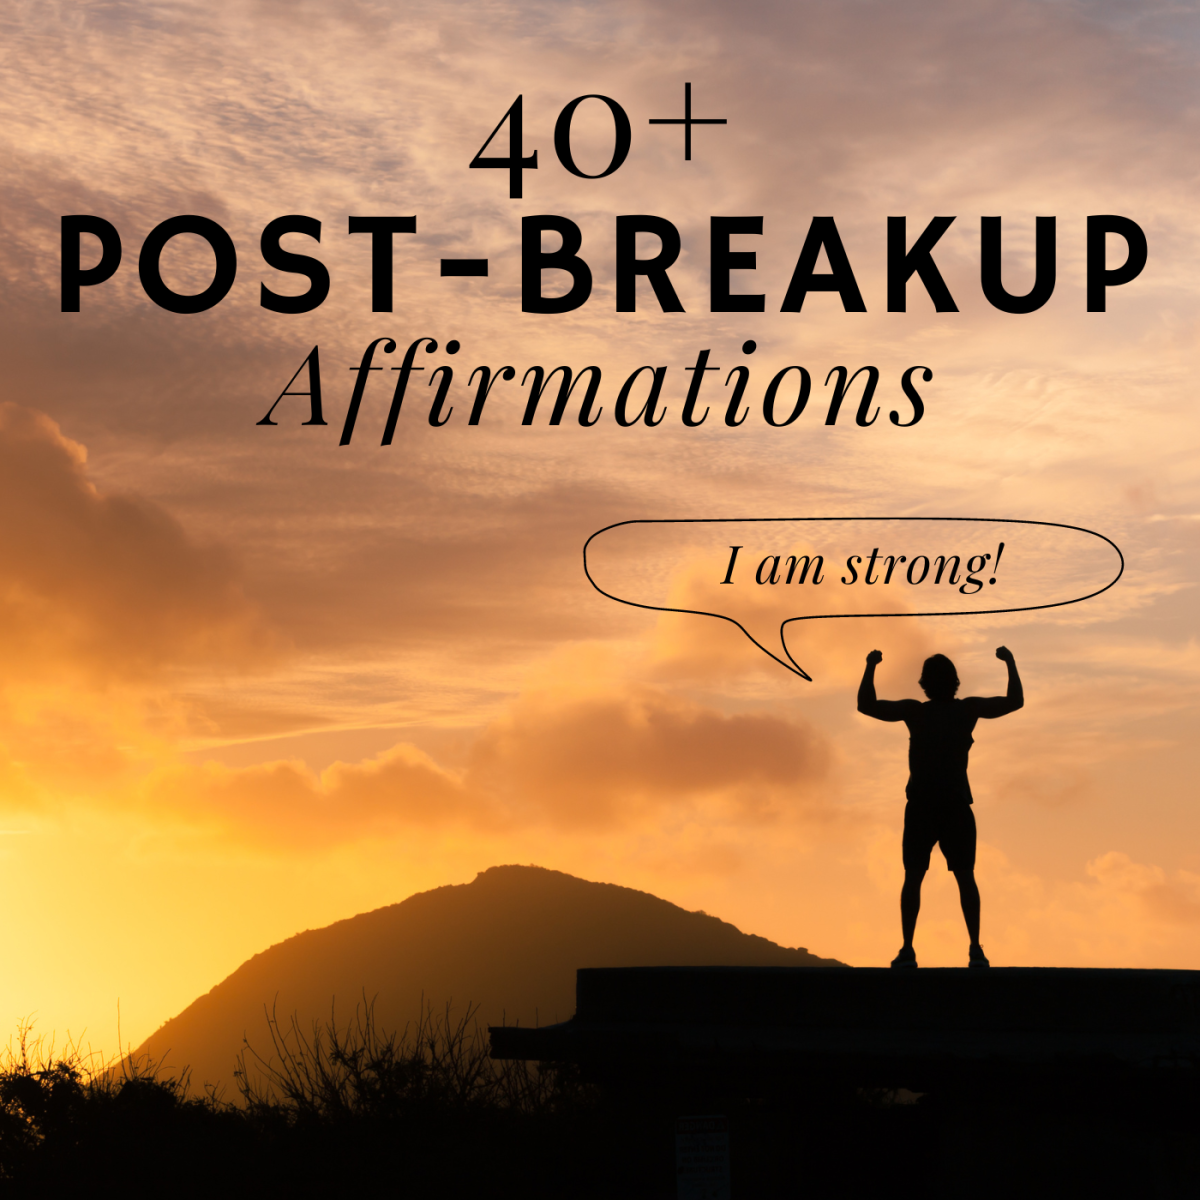 40+ positive breakup affirmations to help you heal